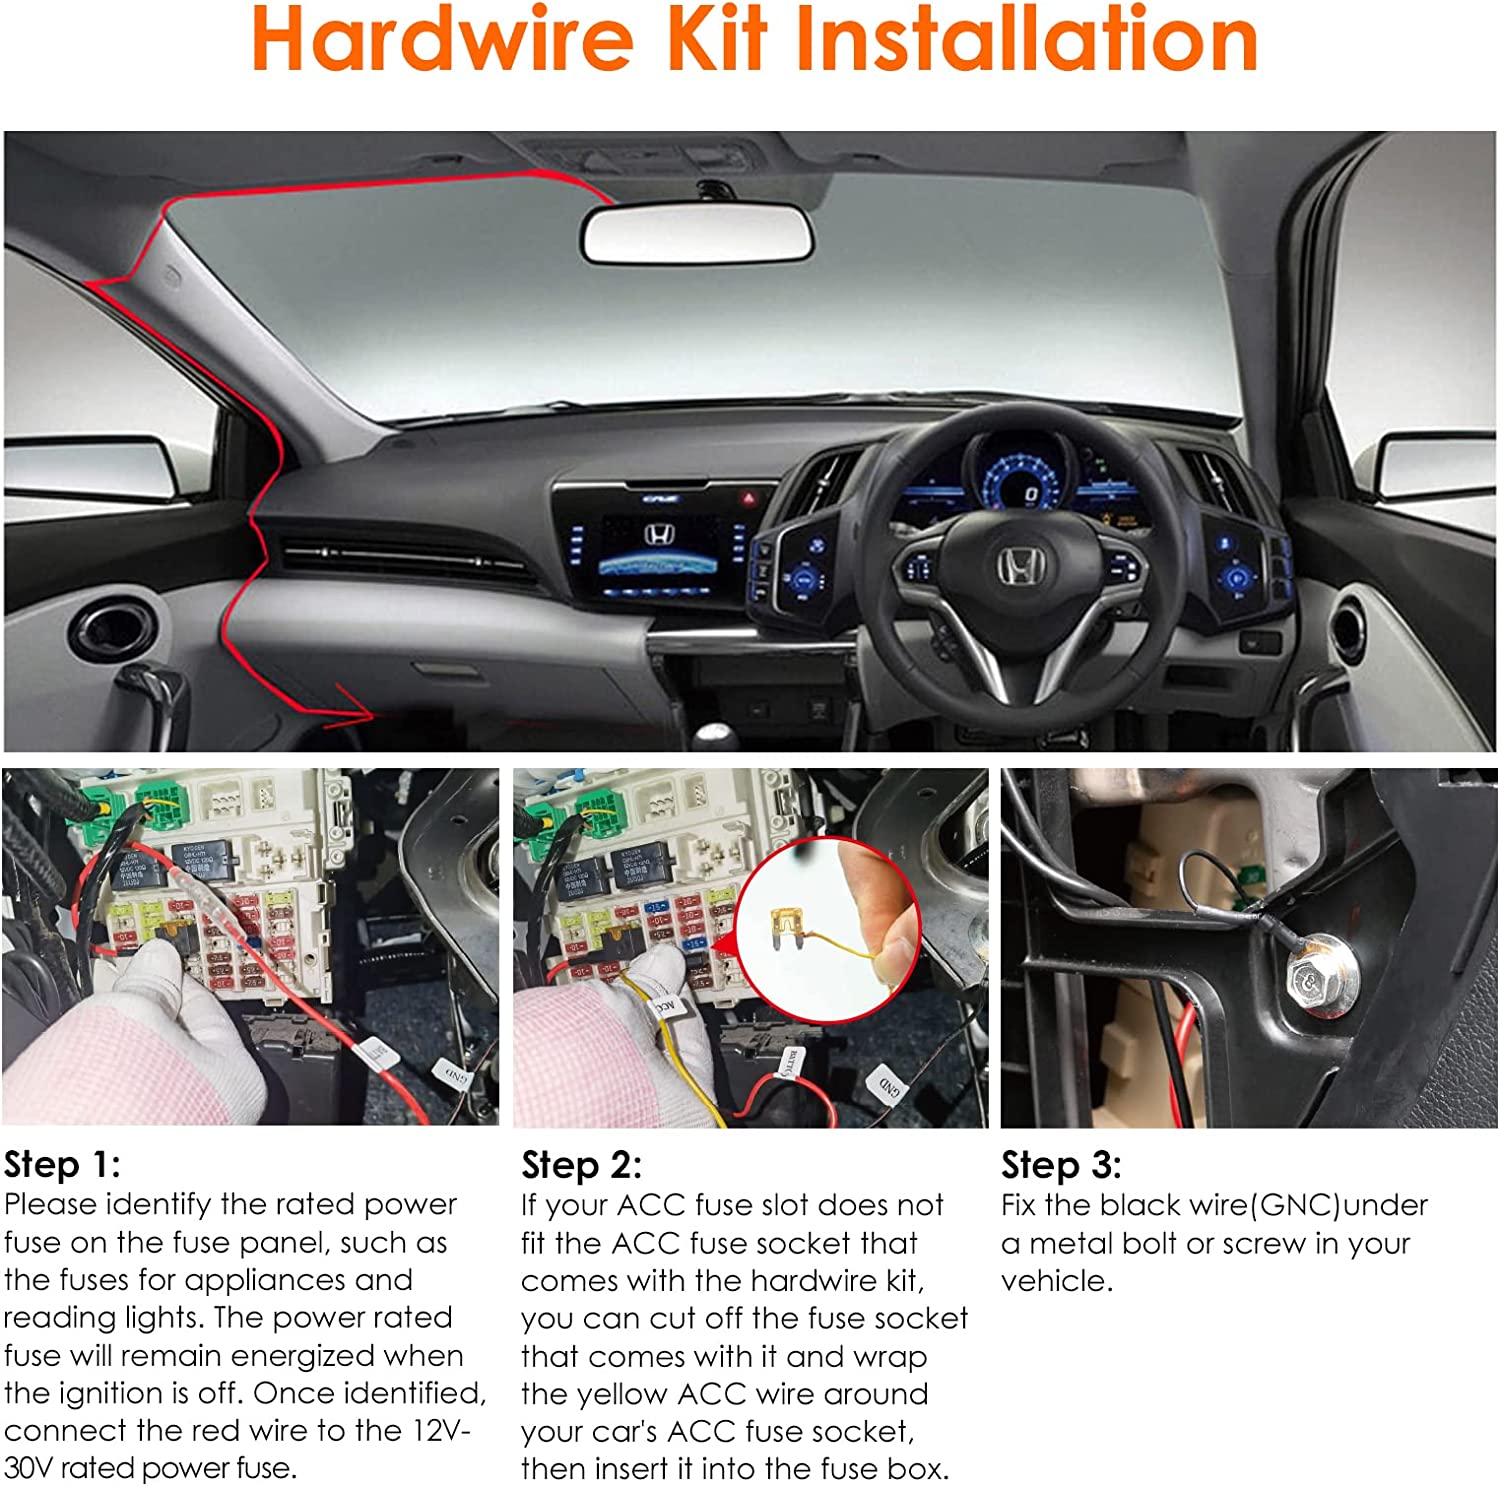 How to Hardwire a Dash Cam with the Charger Plus Hardwire Kit